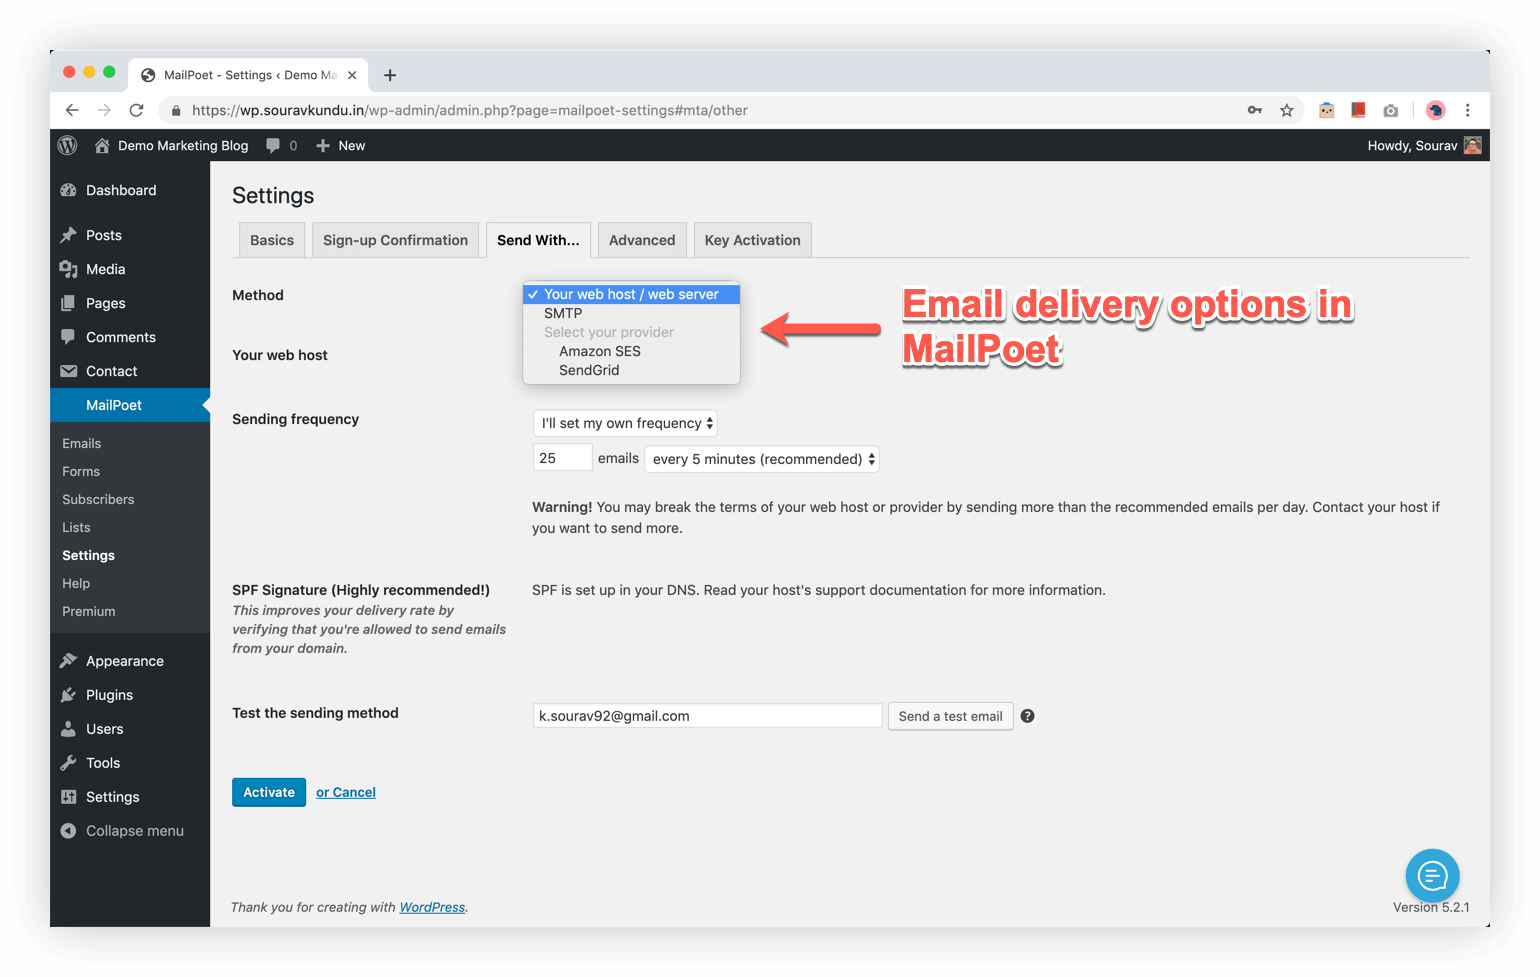 Email Delivery Options in MailPoet